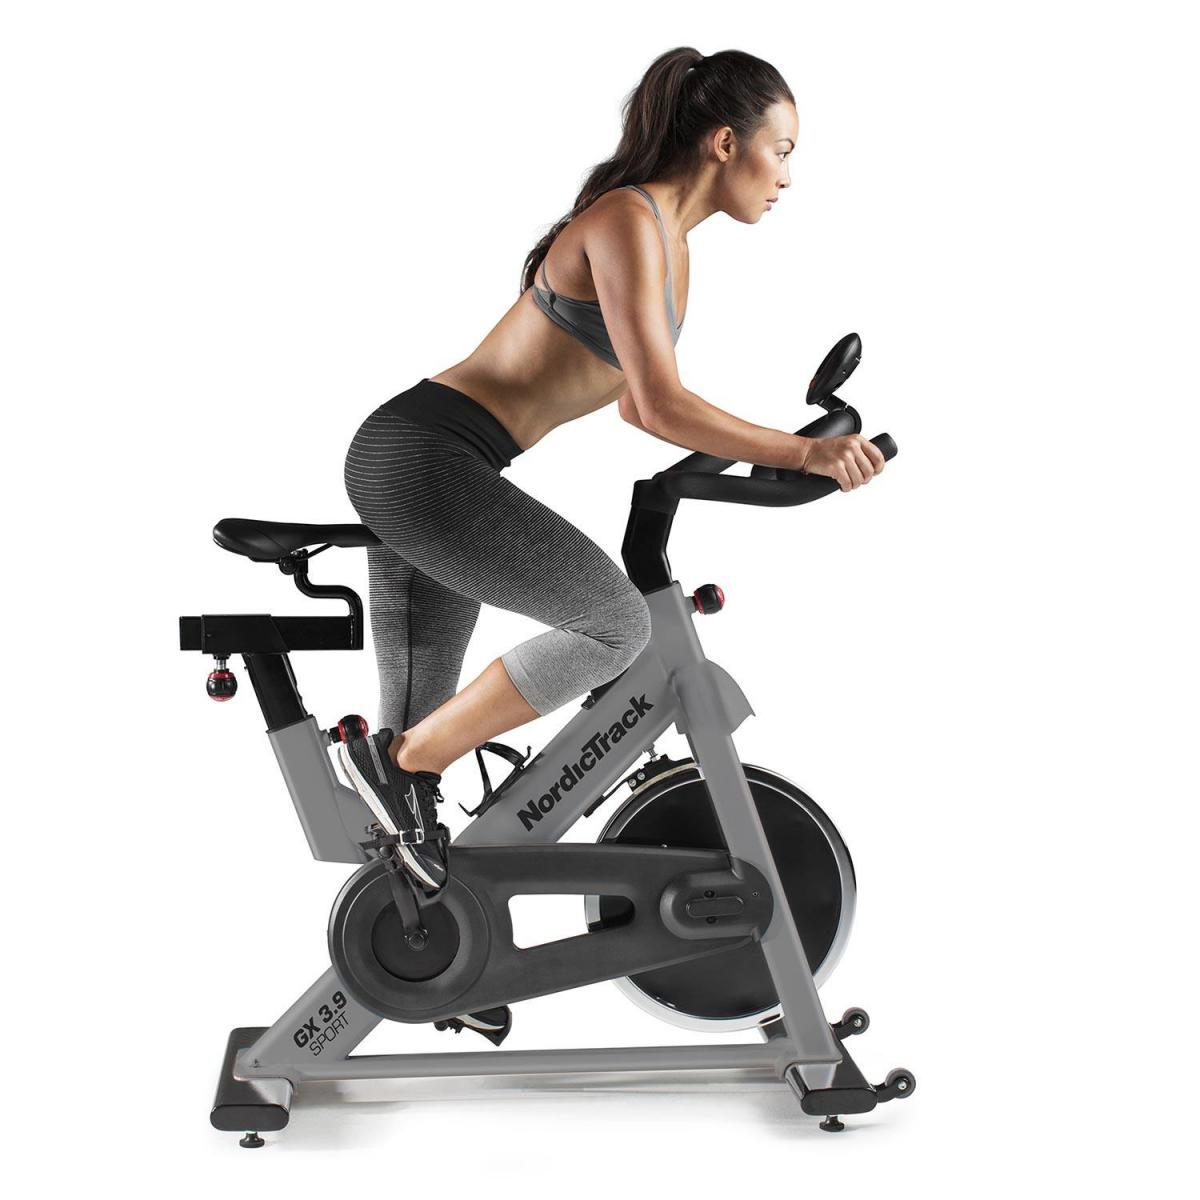 bike glutes calves hamstrings leg muscles workout exercise health fitness cardio